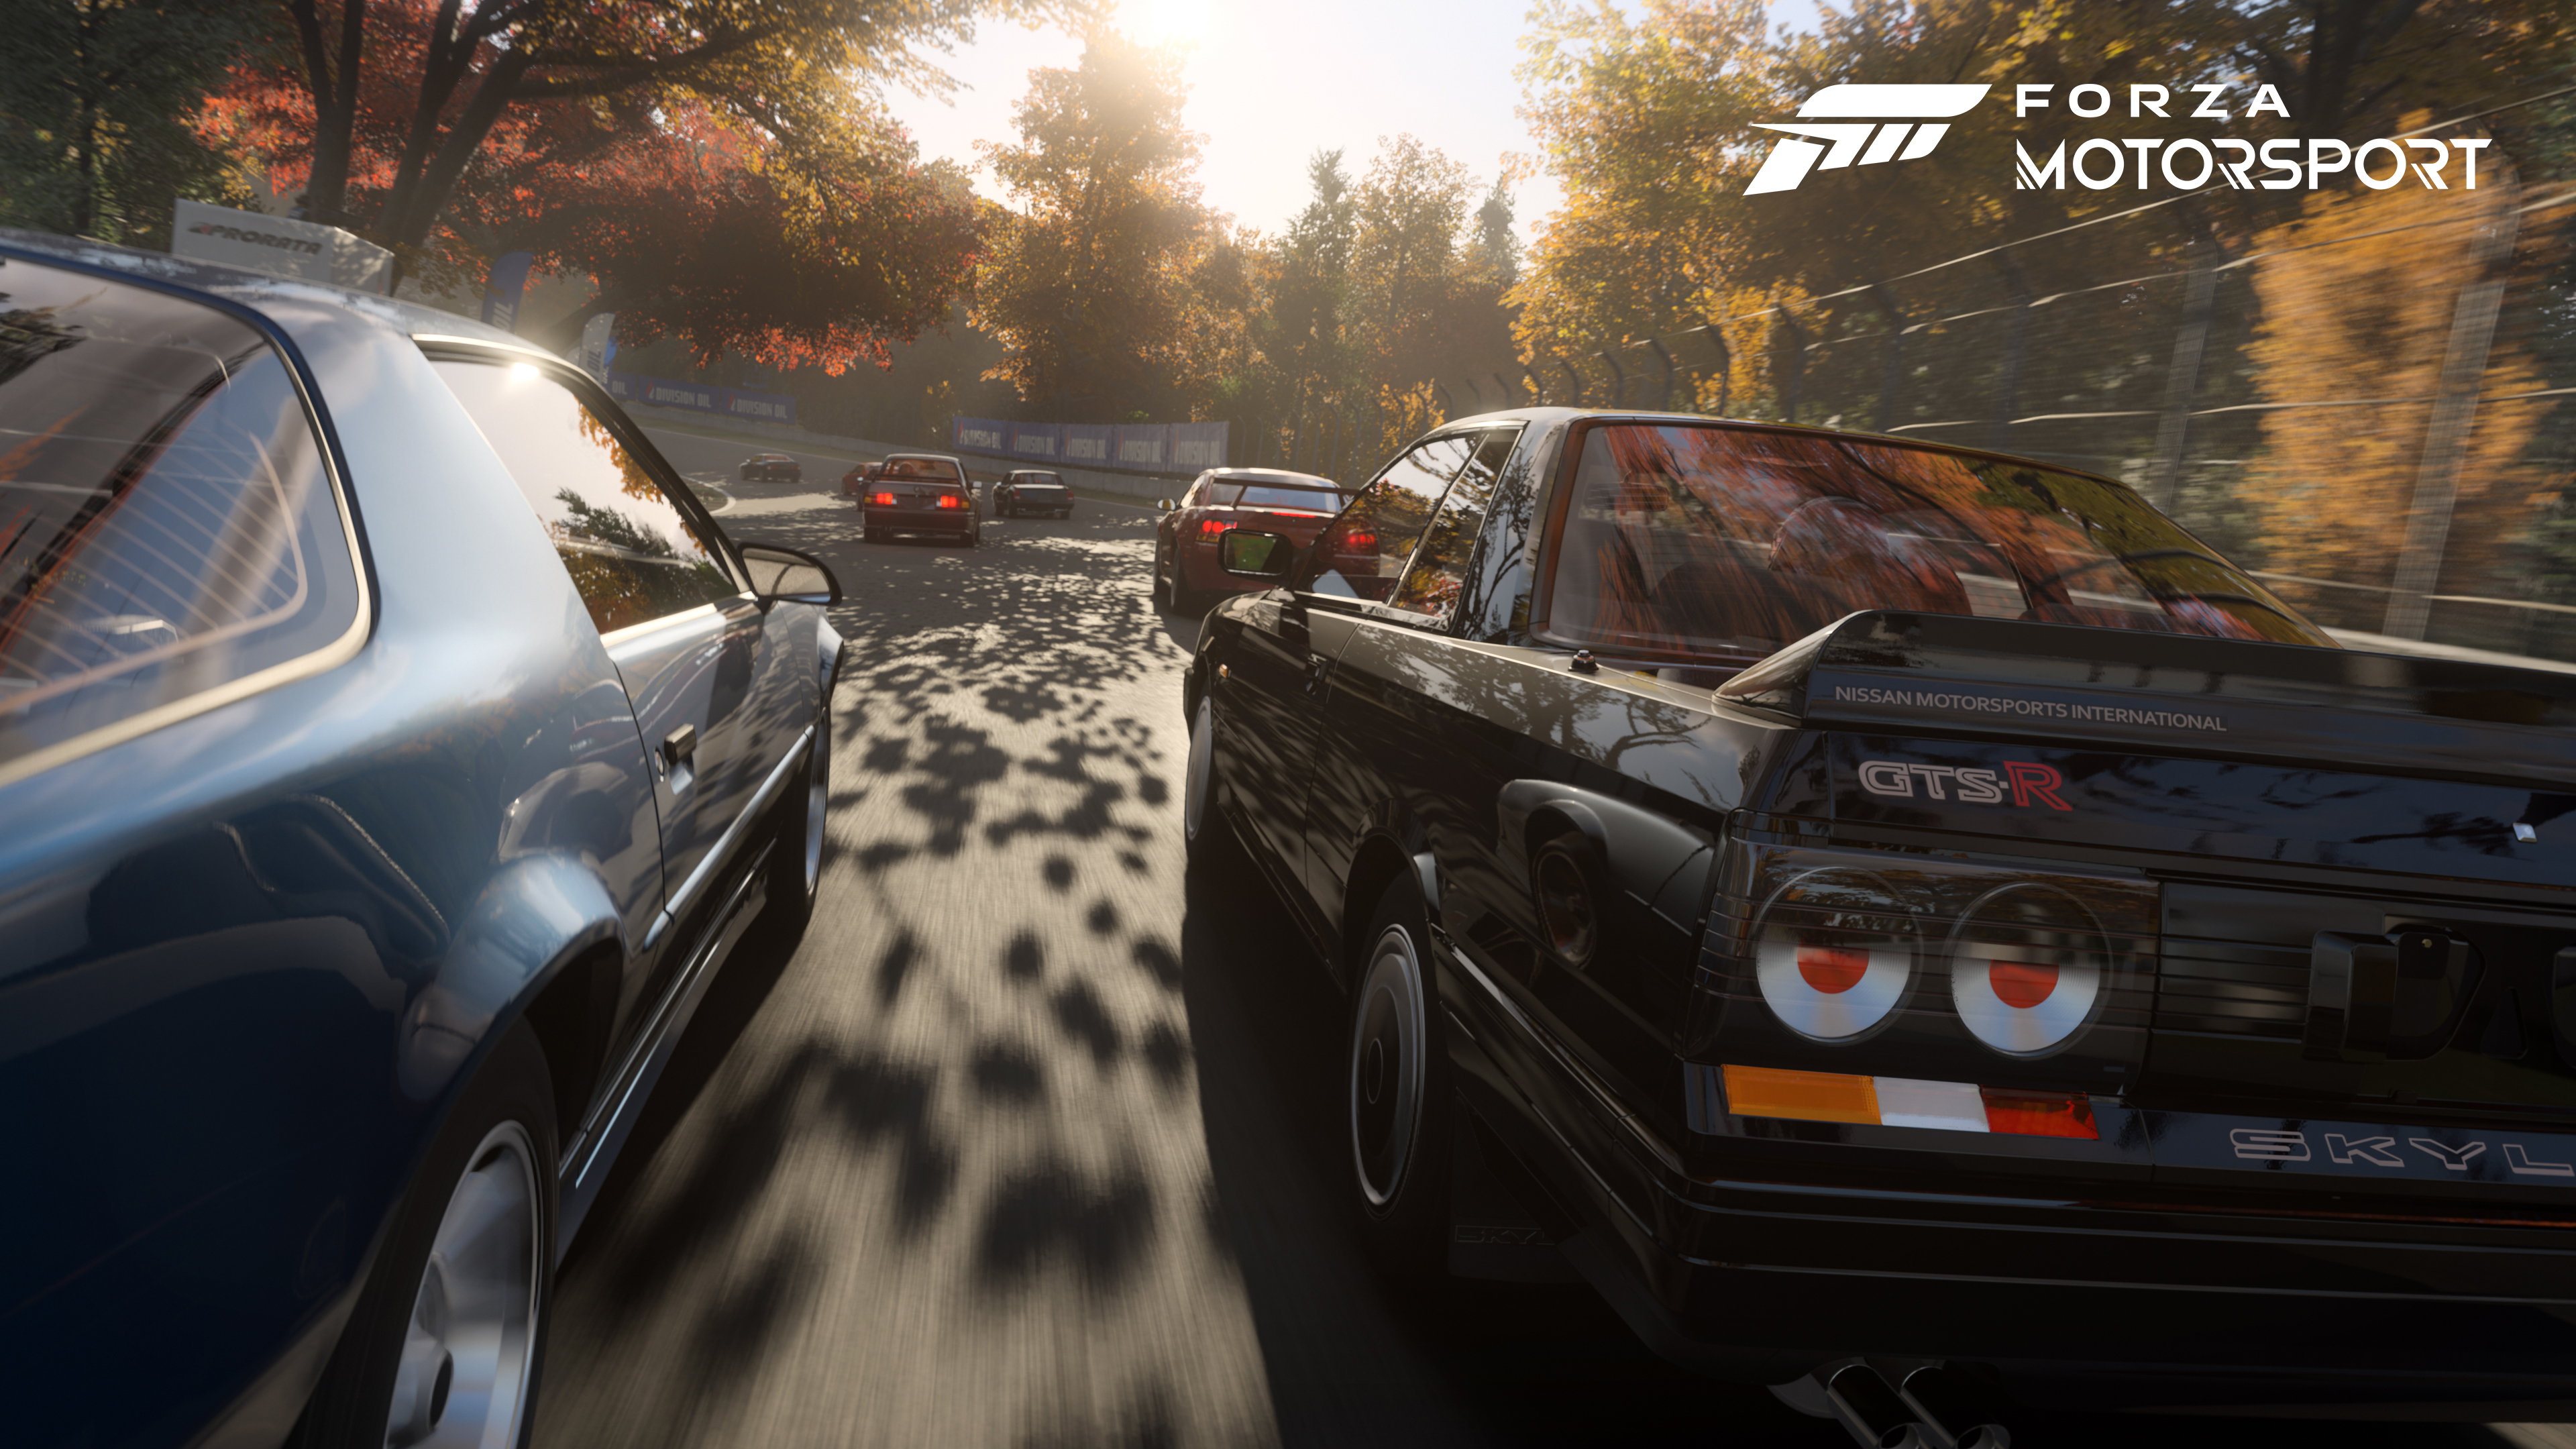 At Darren's World of Entertainment: Forza Horizon 4: XBox One Review